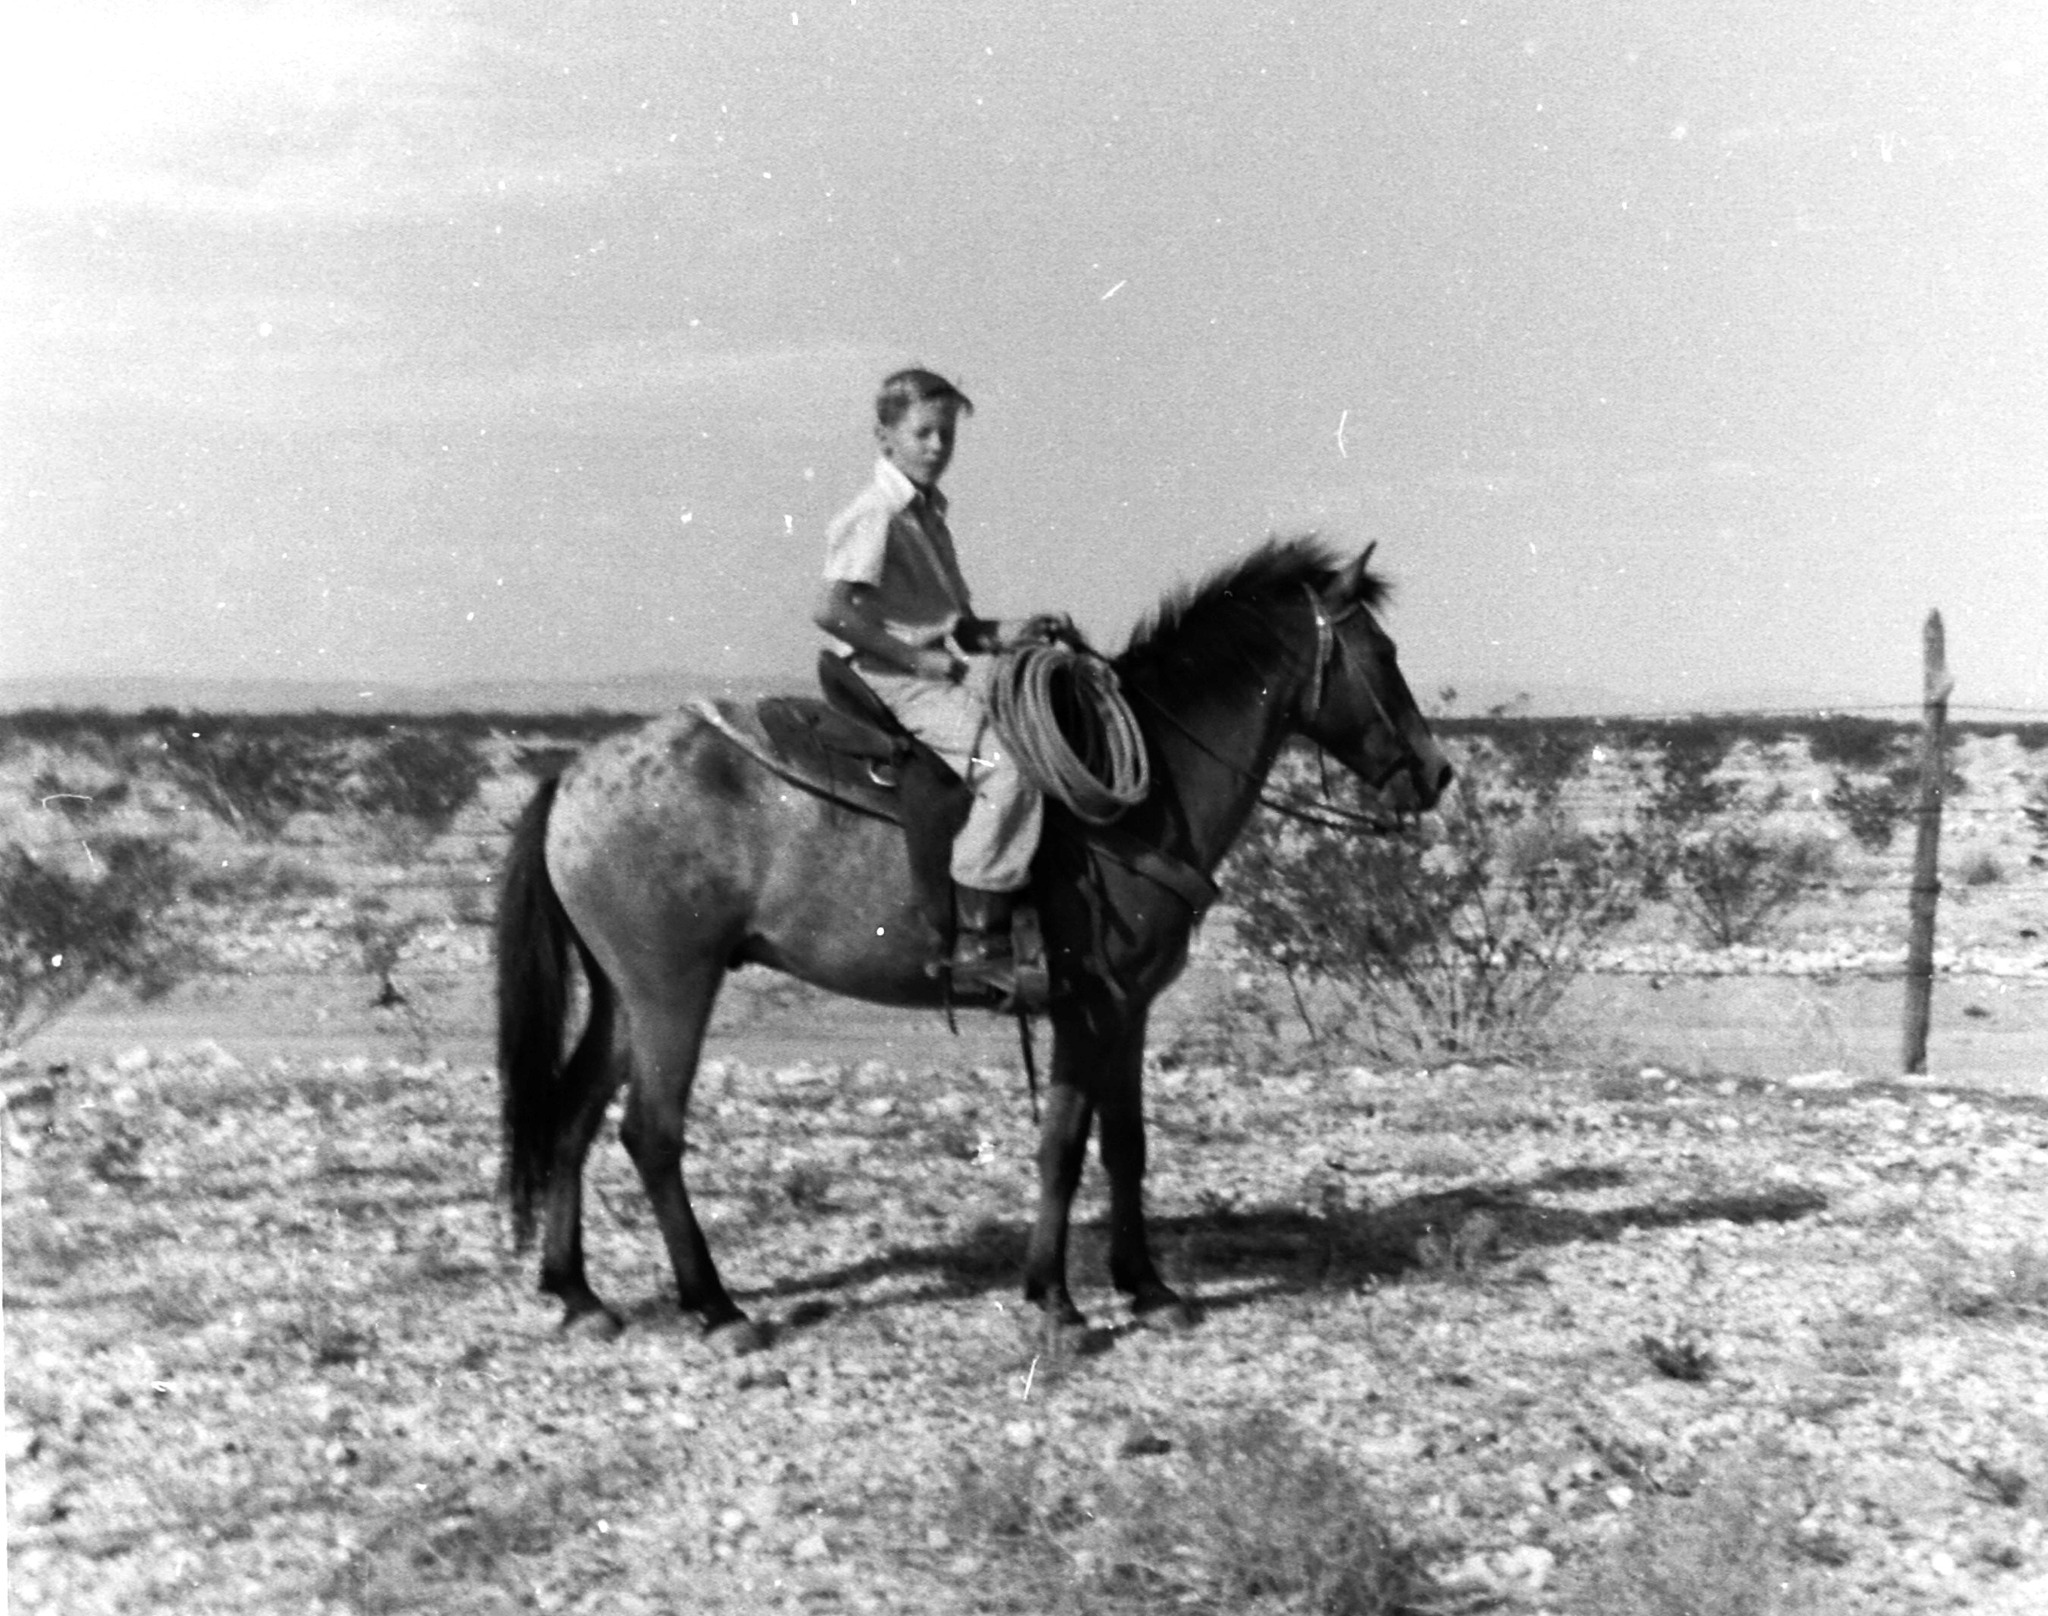 Black and white photo of a young boy on horseback with desert scenery behind him.